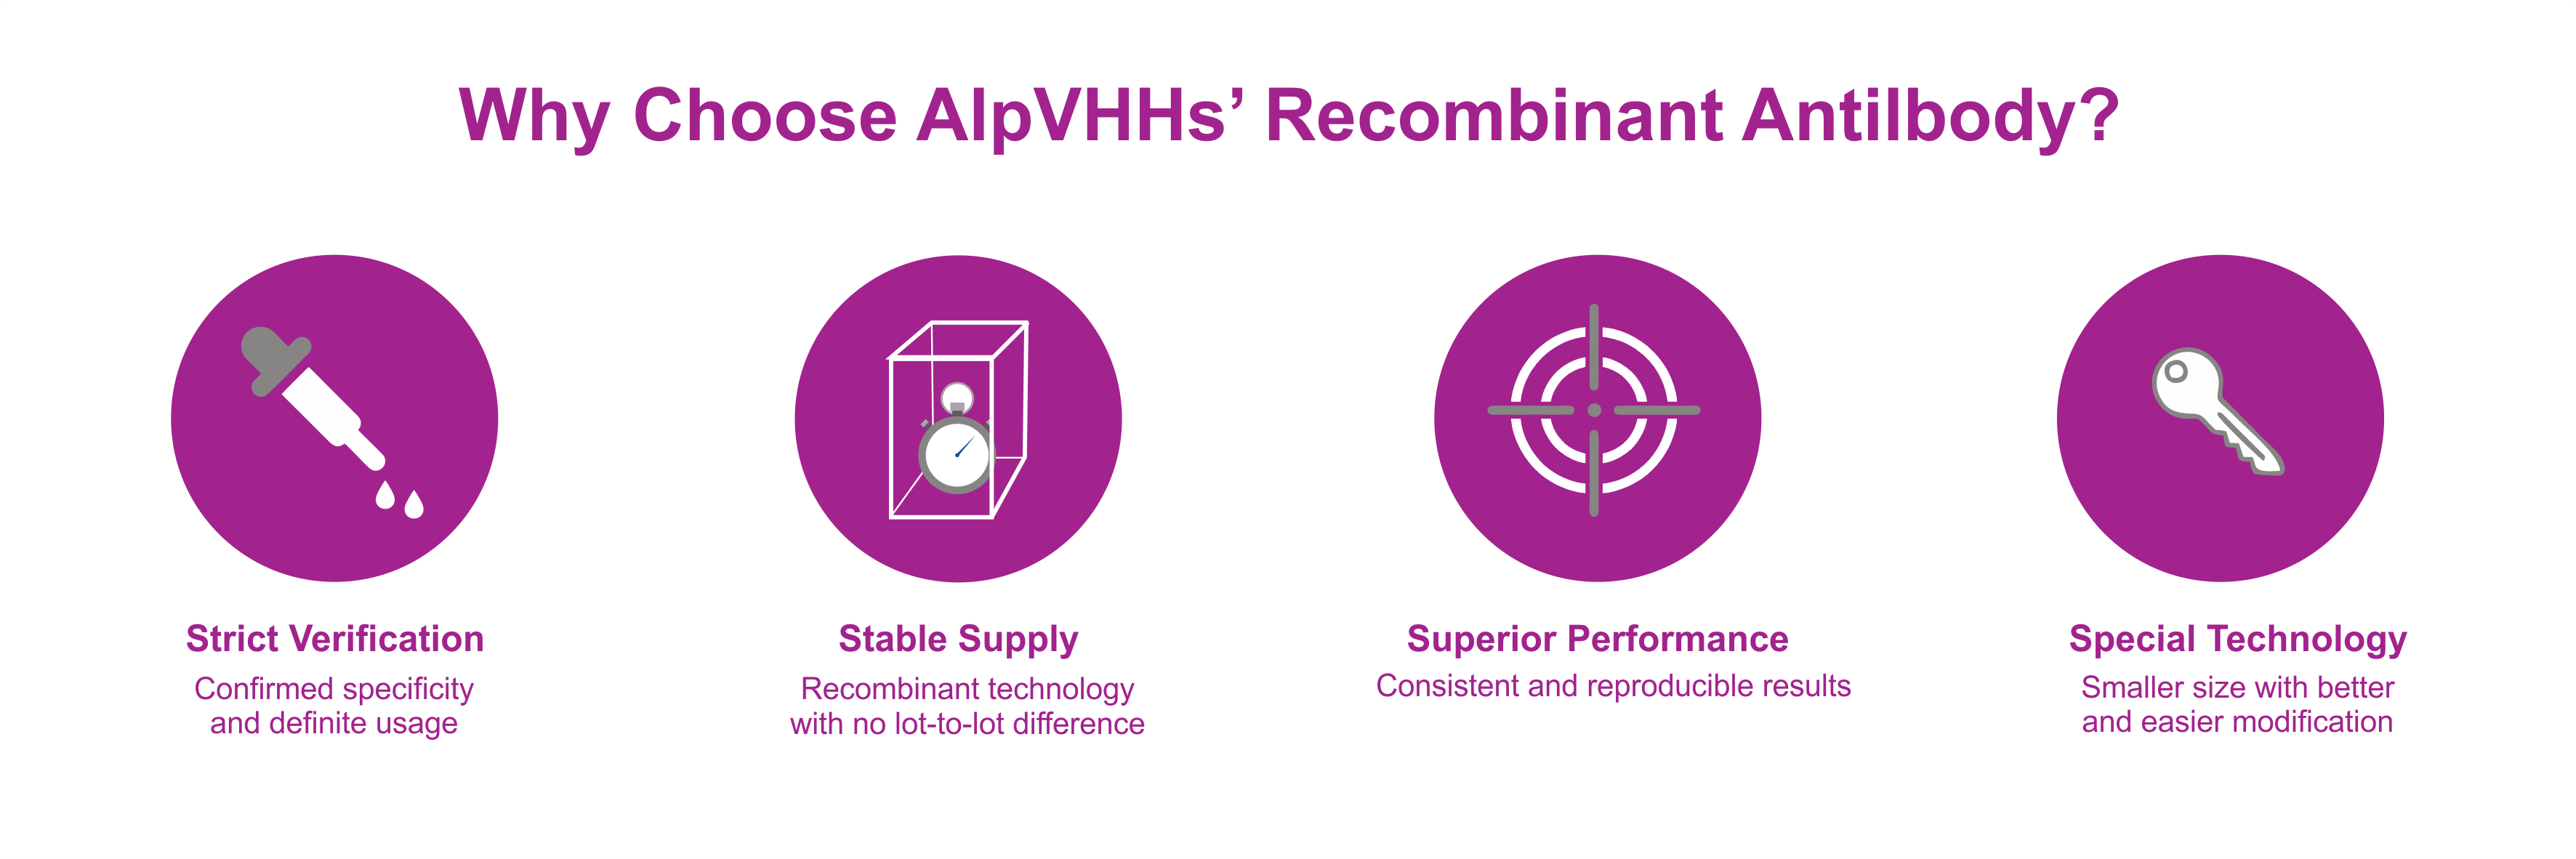 Why Choose AlpVHHs’ Recombinant Antilbody.png